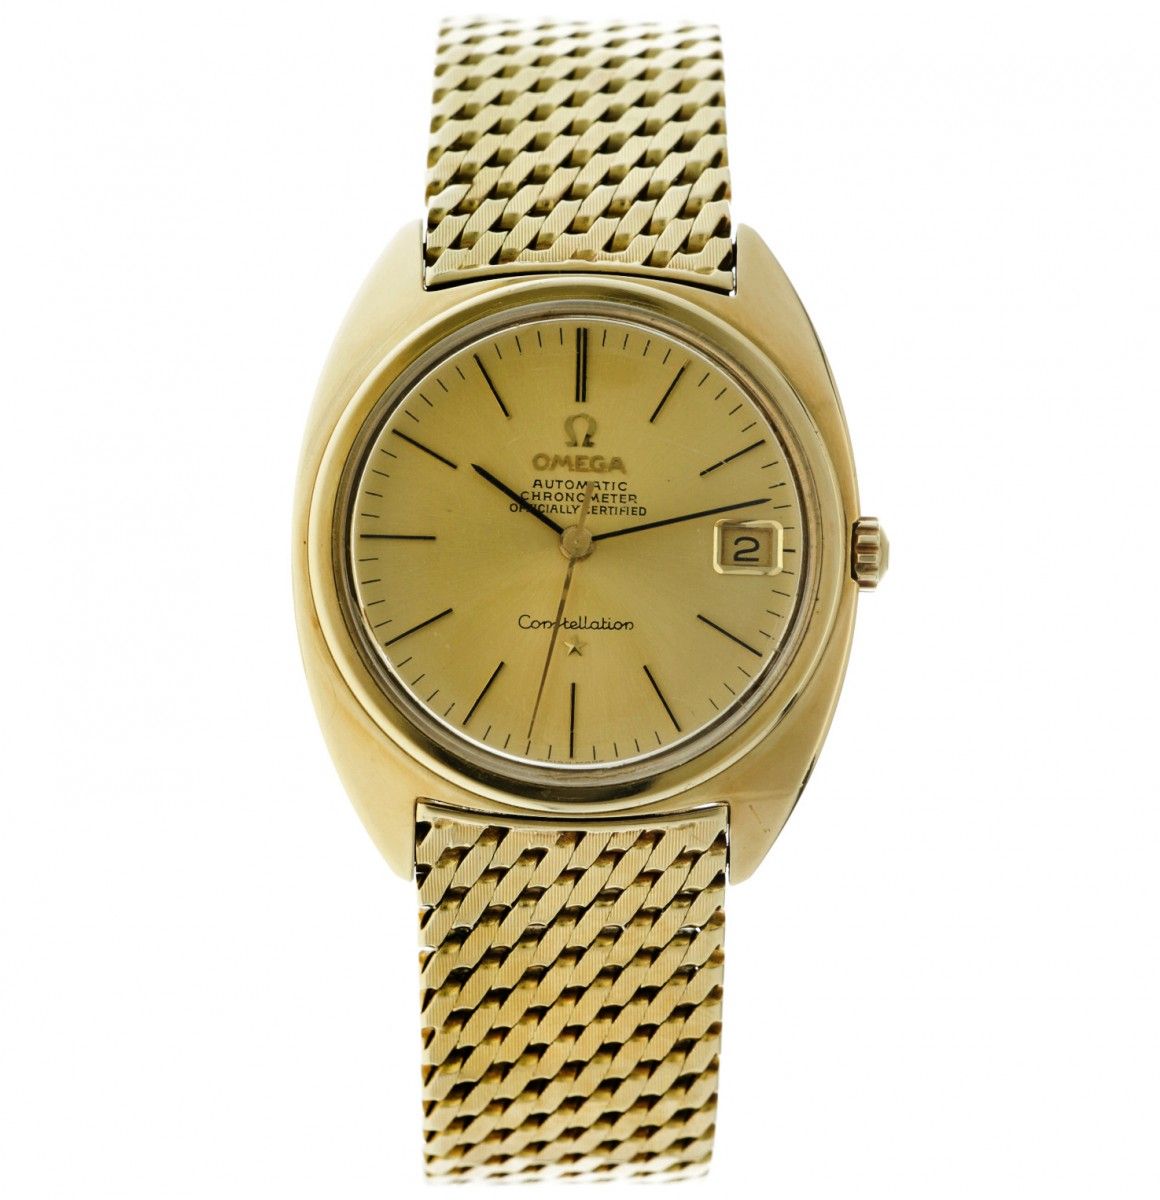 Omega Constellation 168009 - Men's watch - apprx. 1967. Case: yellow gold (14 kt&hellip;